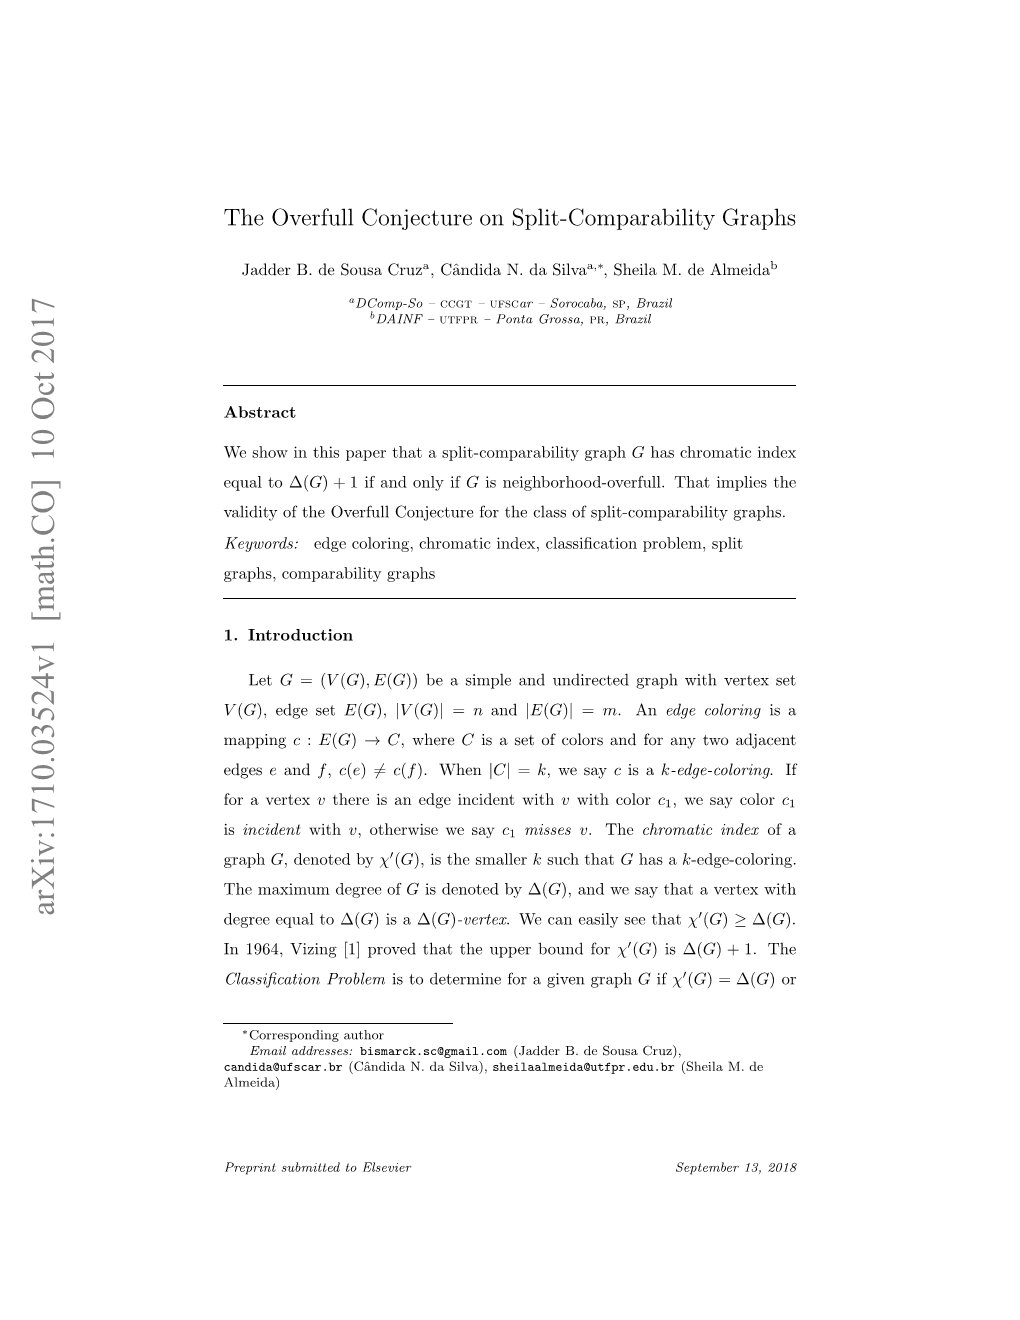 The Overfull Conjecture on Split-Comparability Graphs